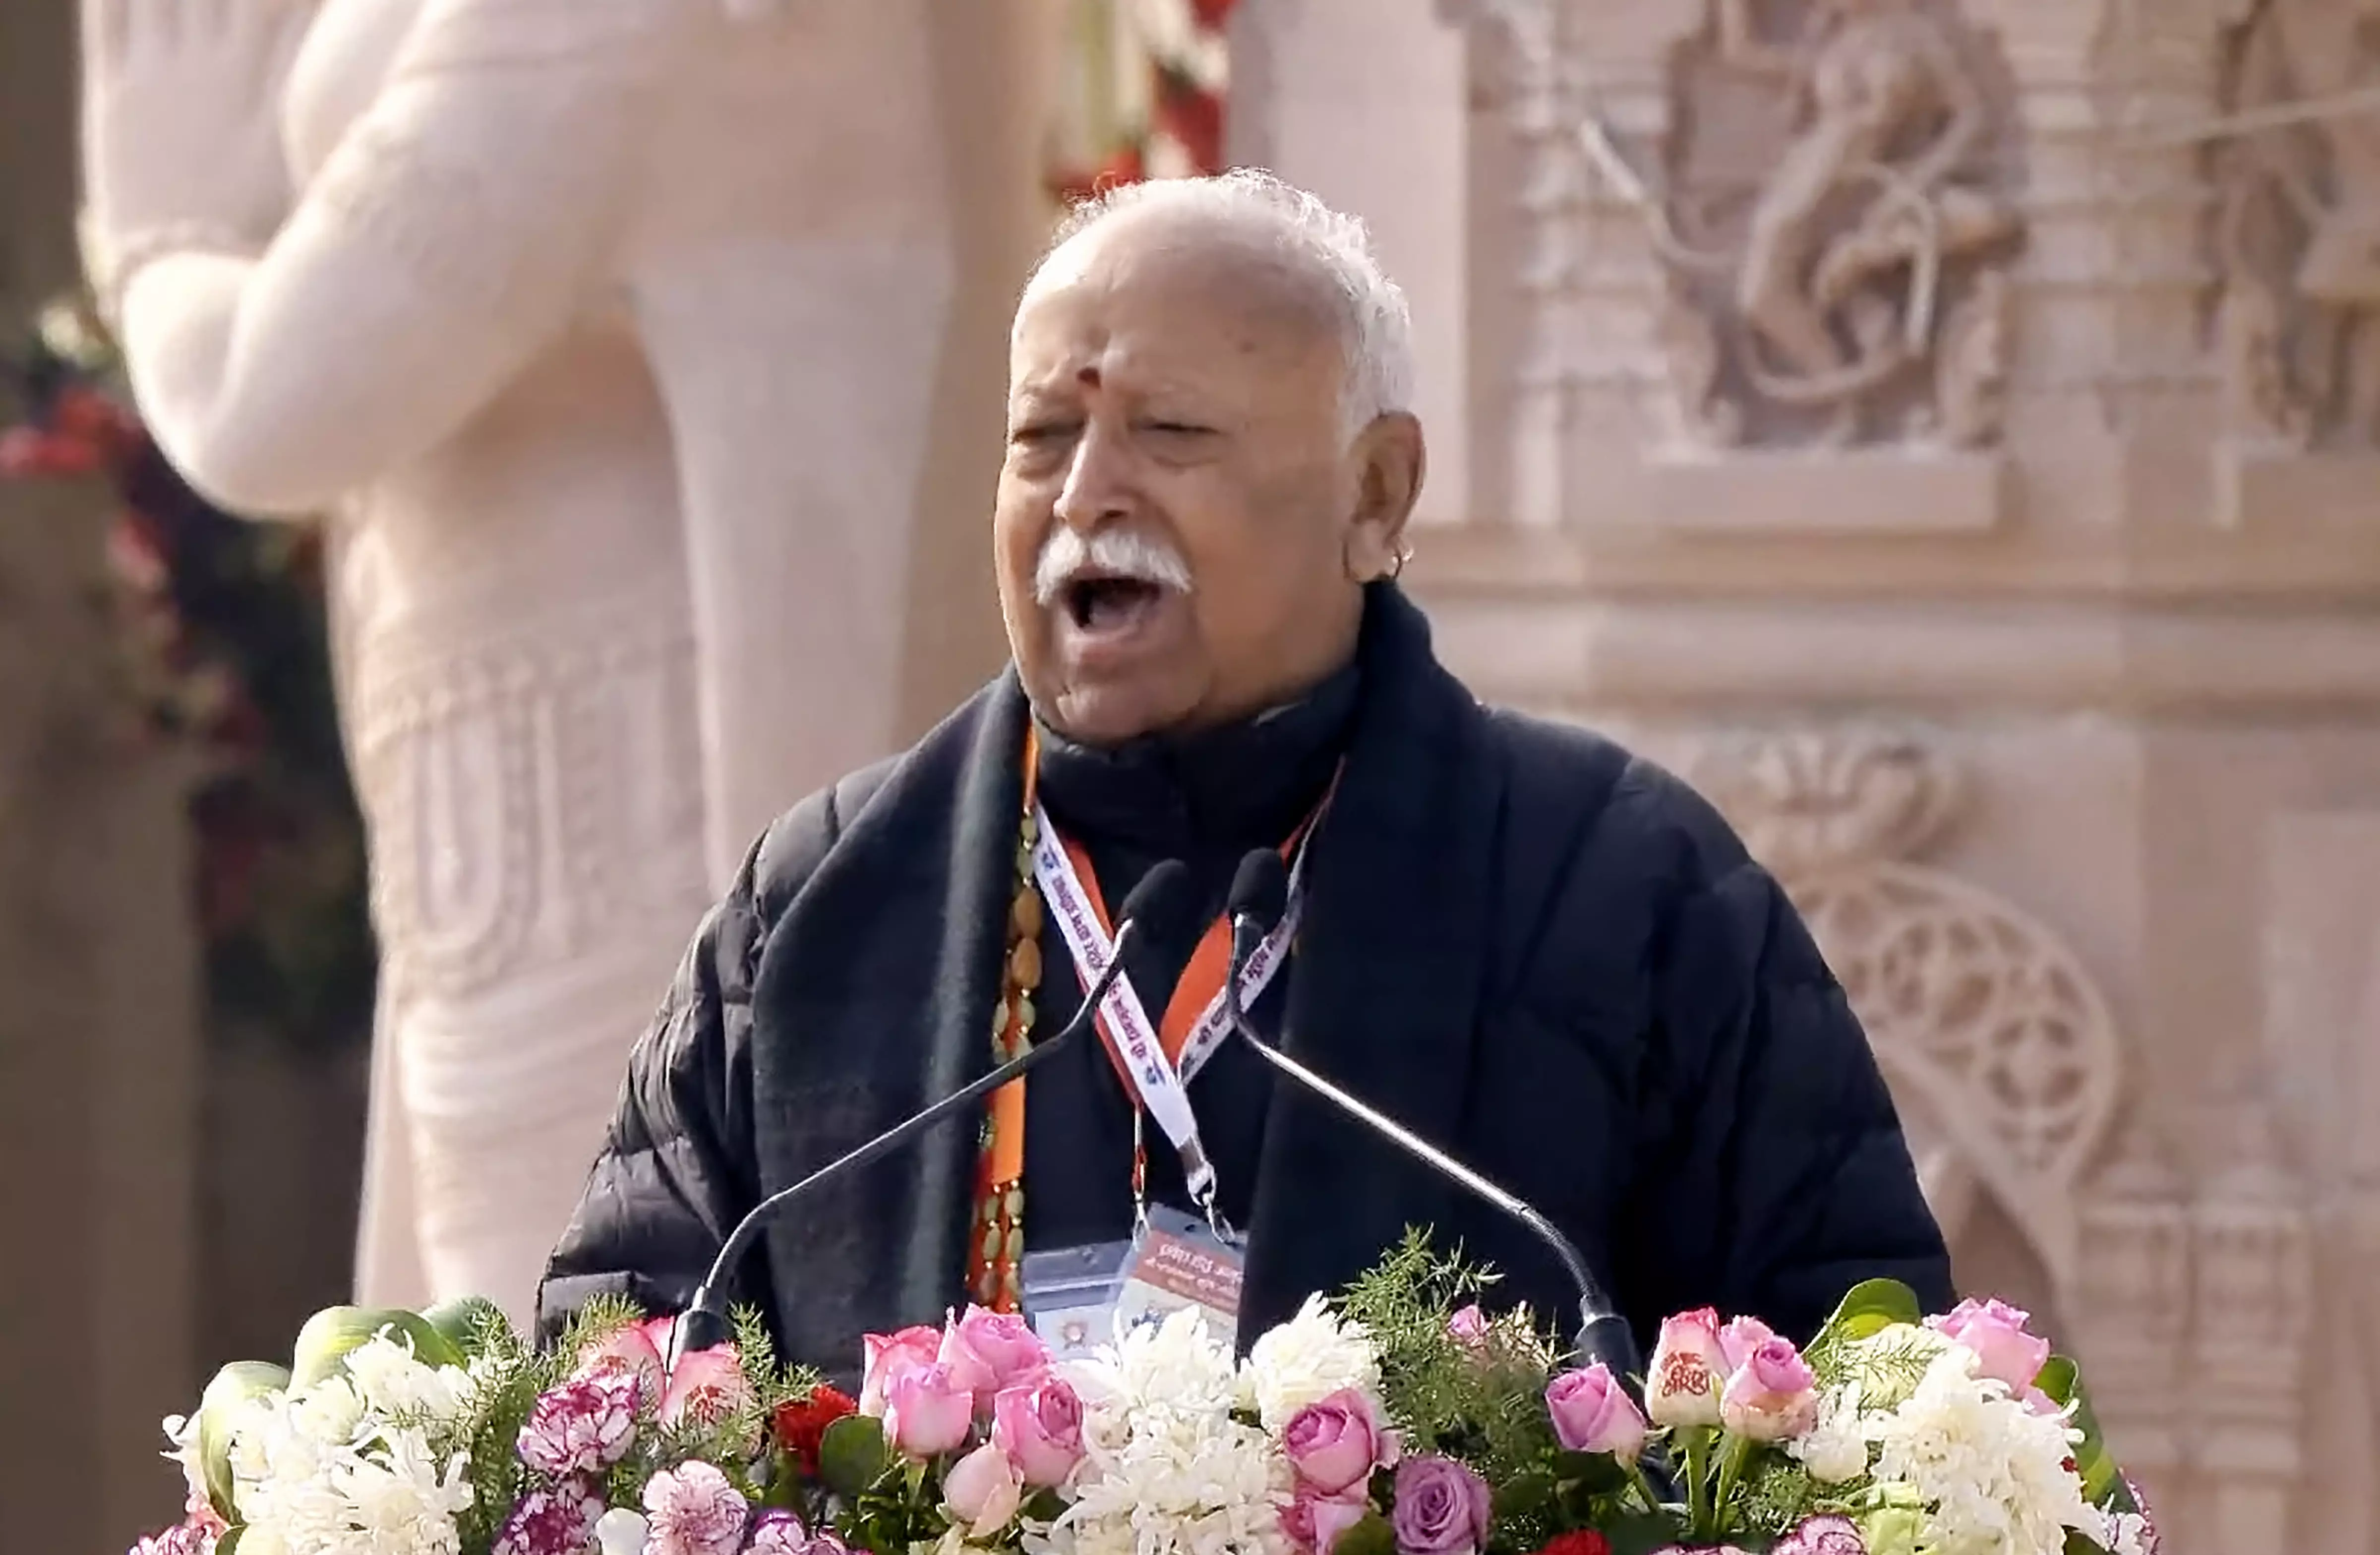 After temple consecration, India gets back self-pride: RSS chief